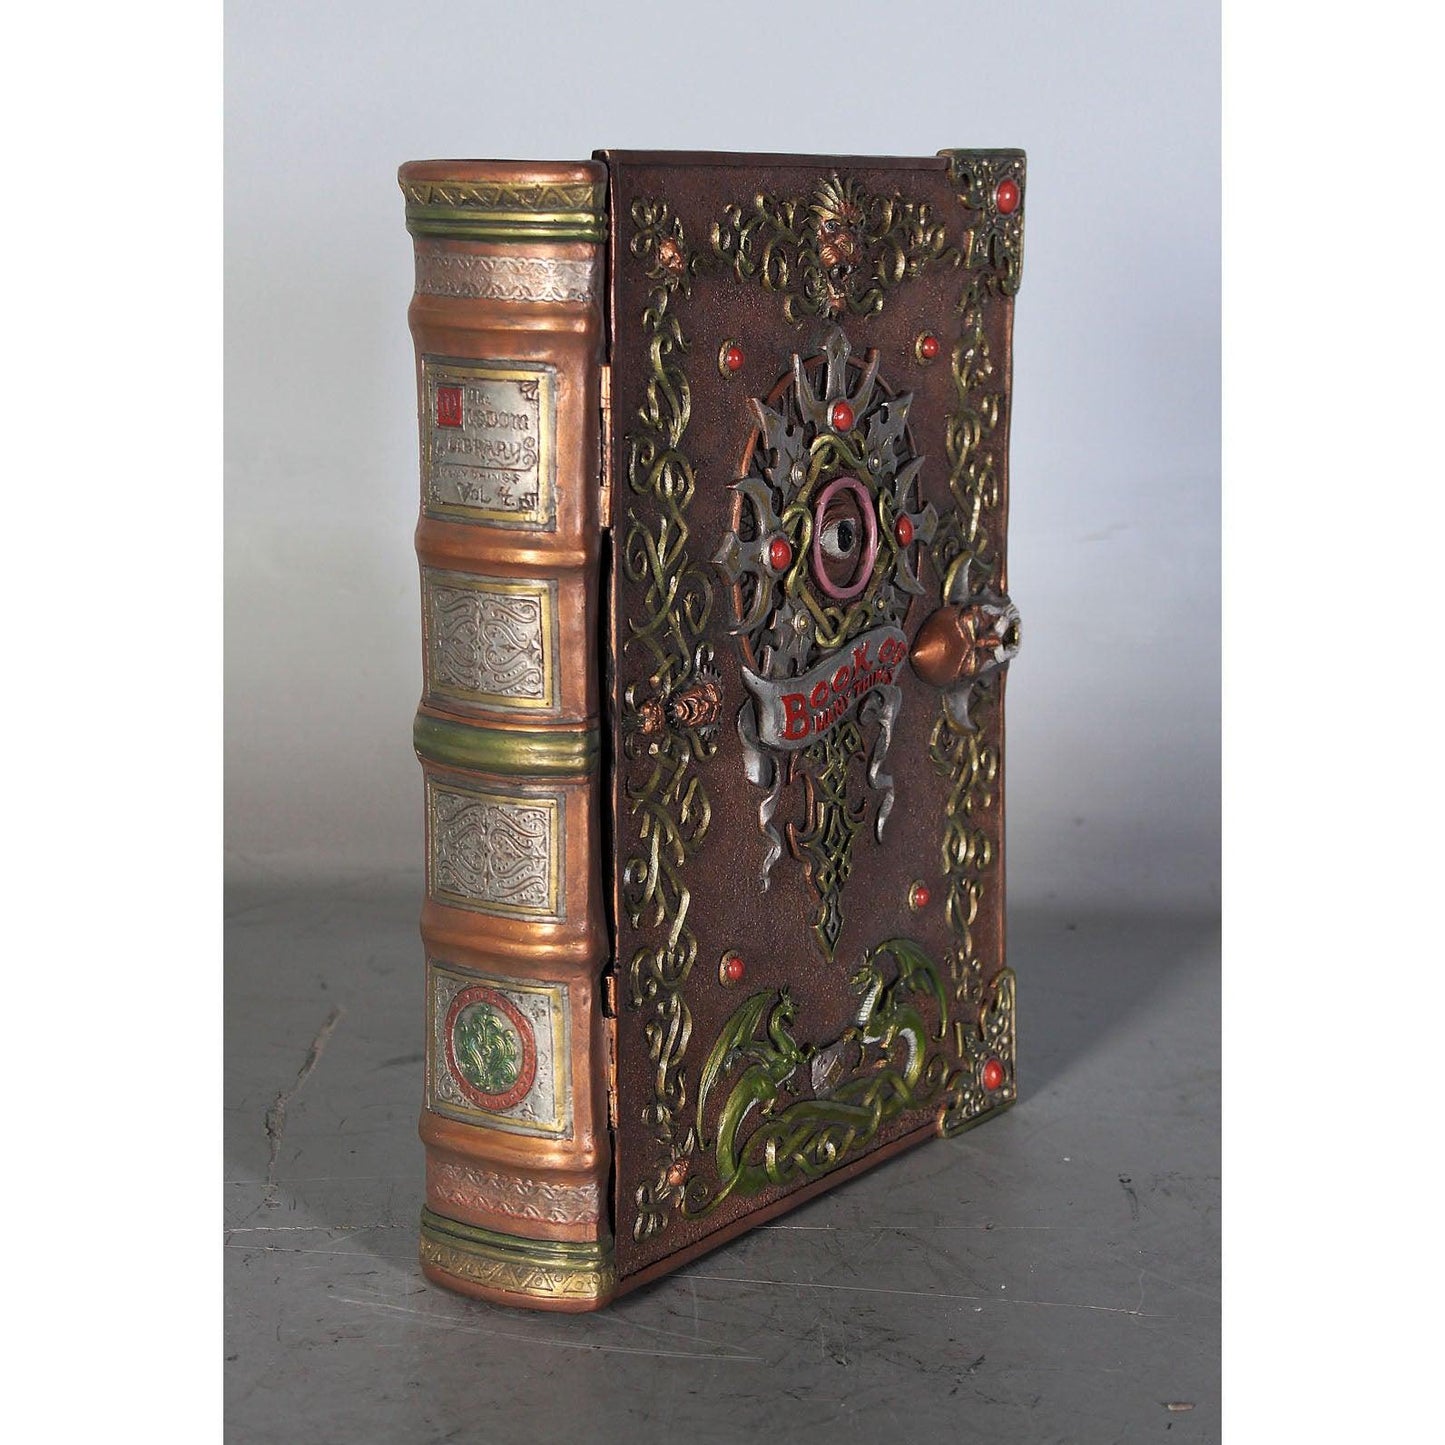 Magic Book Mythical Storage Container Prop Resin Decor - LM Treasures Prop Rentals 